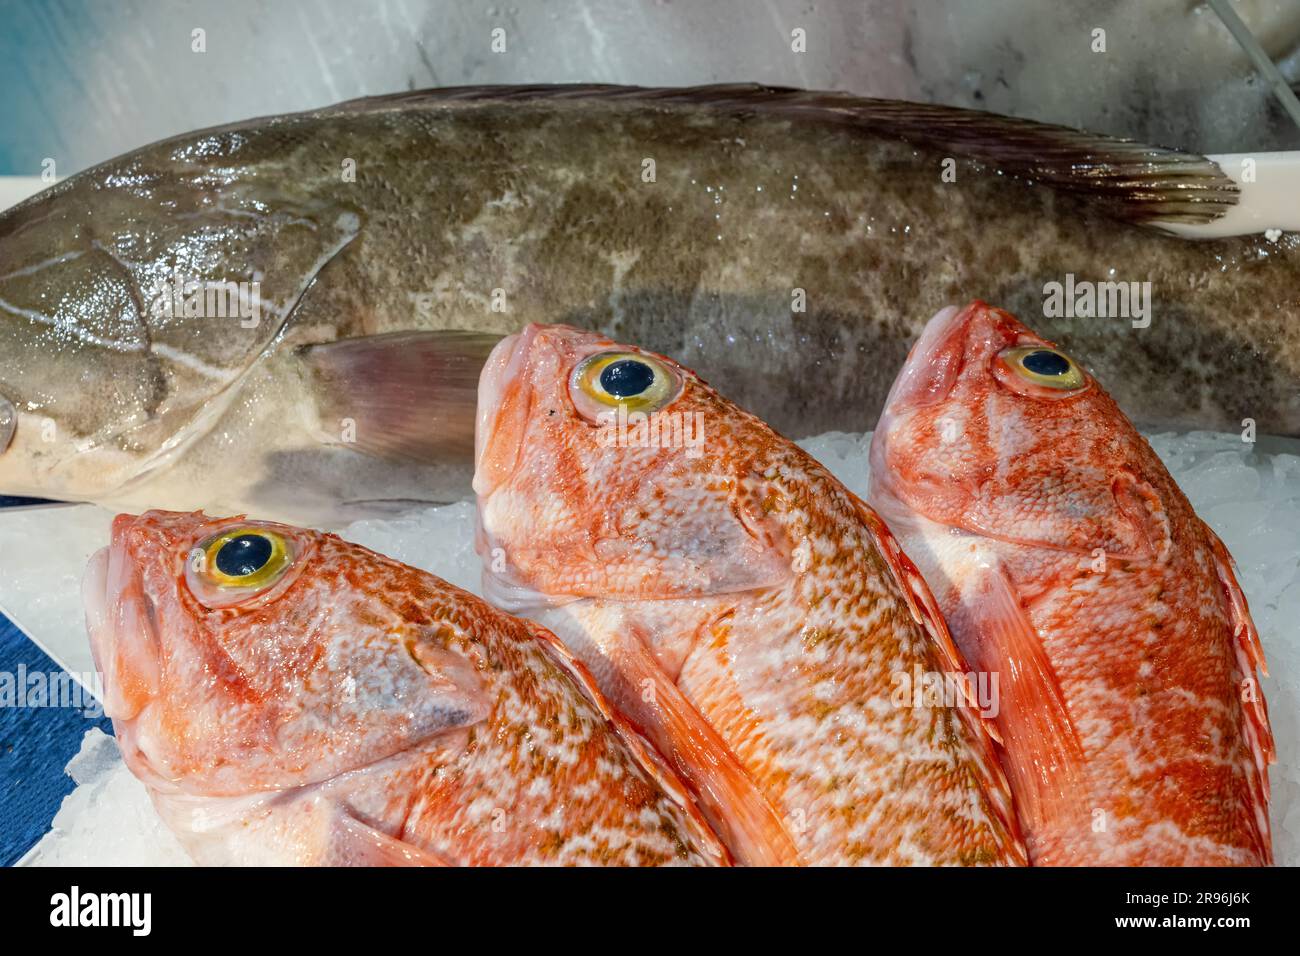 Red mullets and other fish for sale at a market in Lisbon, Portugal Stock Photo